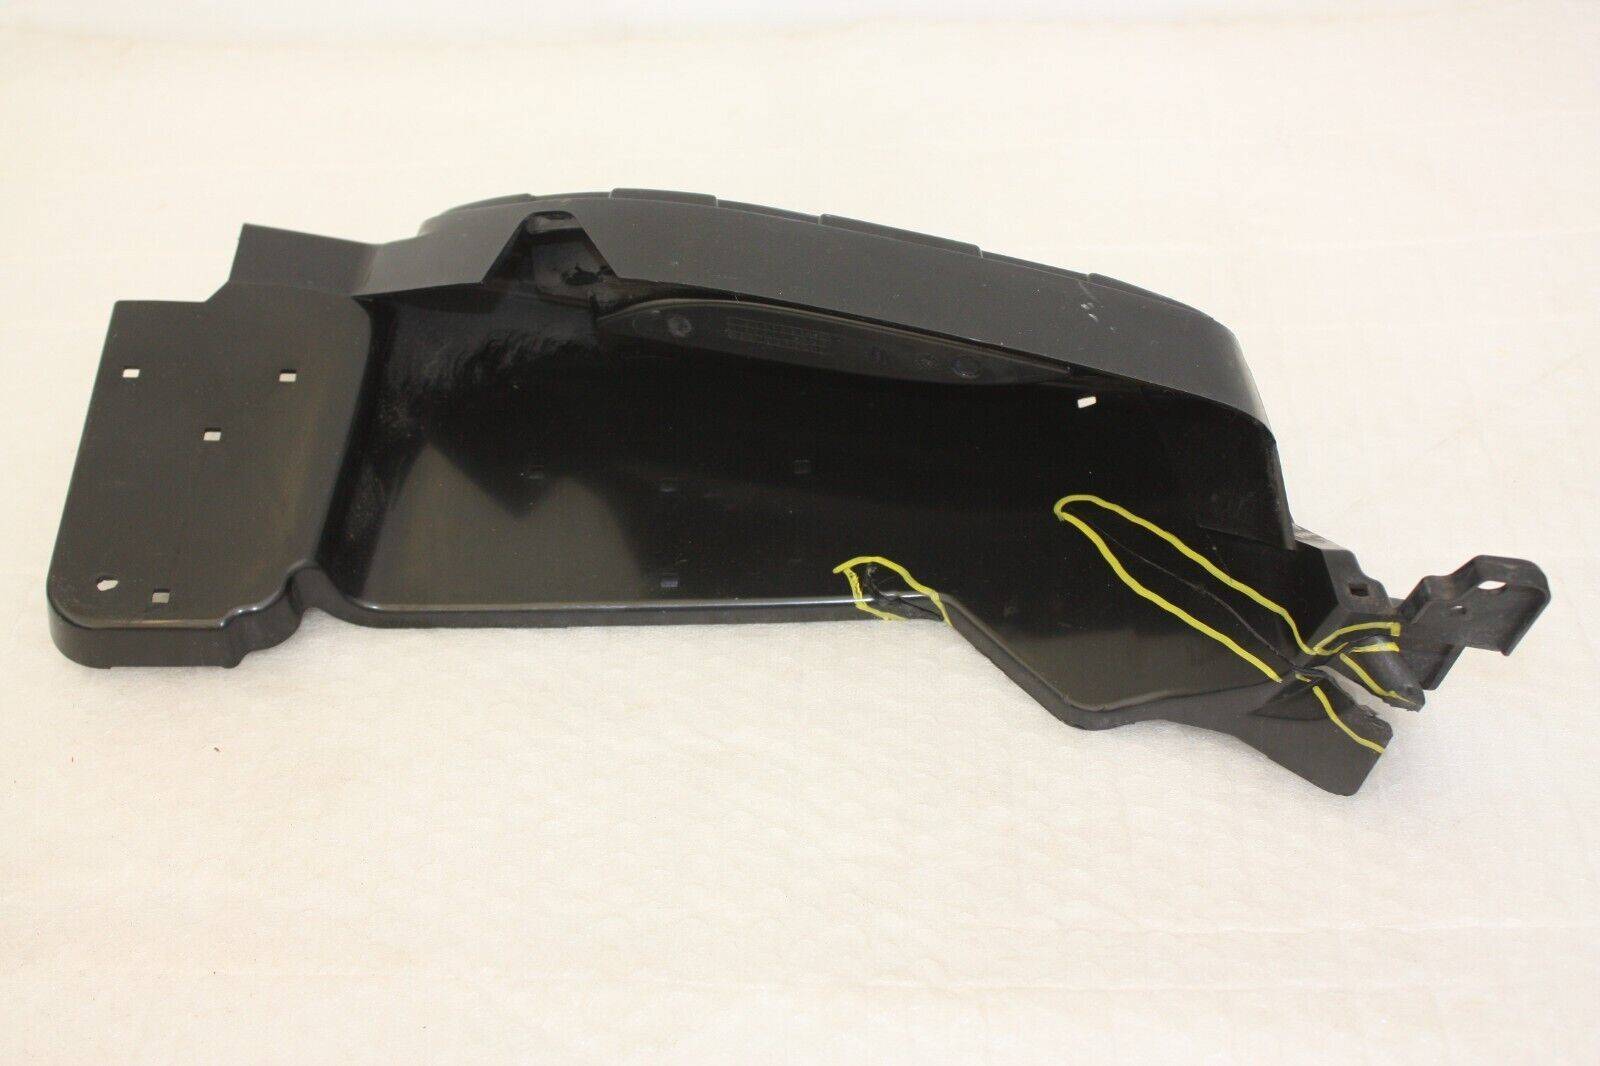 Mercedes-E-Class-C238-AMG-Rear-Right-Exhaust-Tail-Trim-A2388850601-DAMAGED-176306004945-8